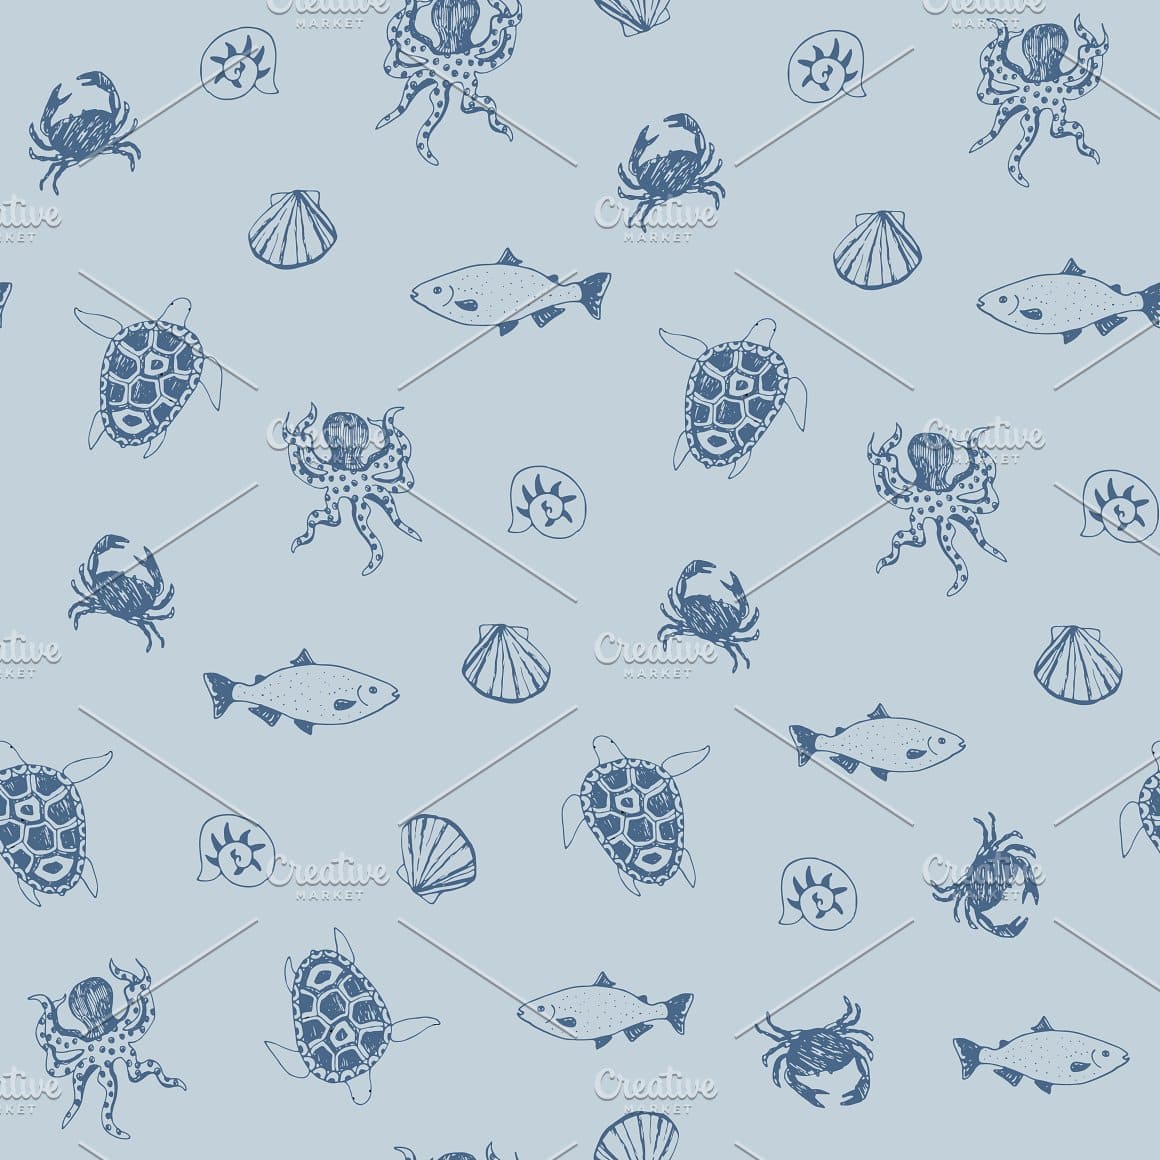 Blue sea animals are drawn on a blue background.